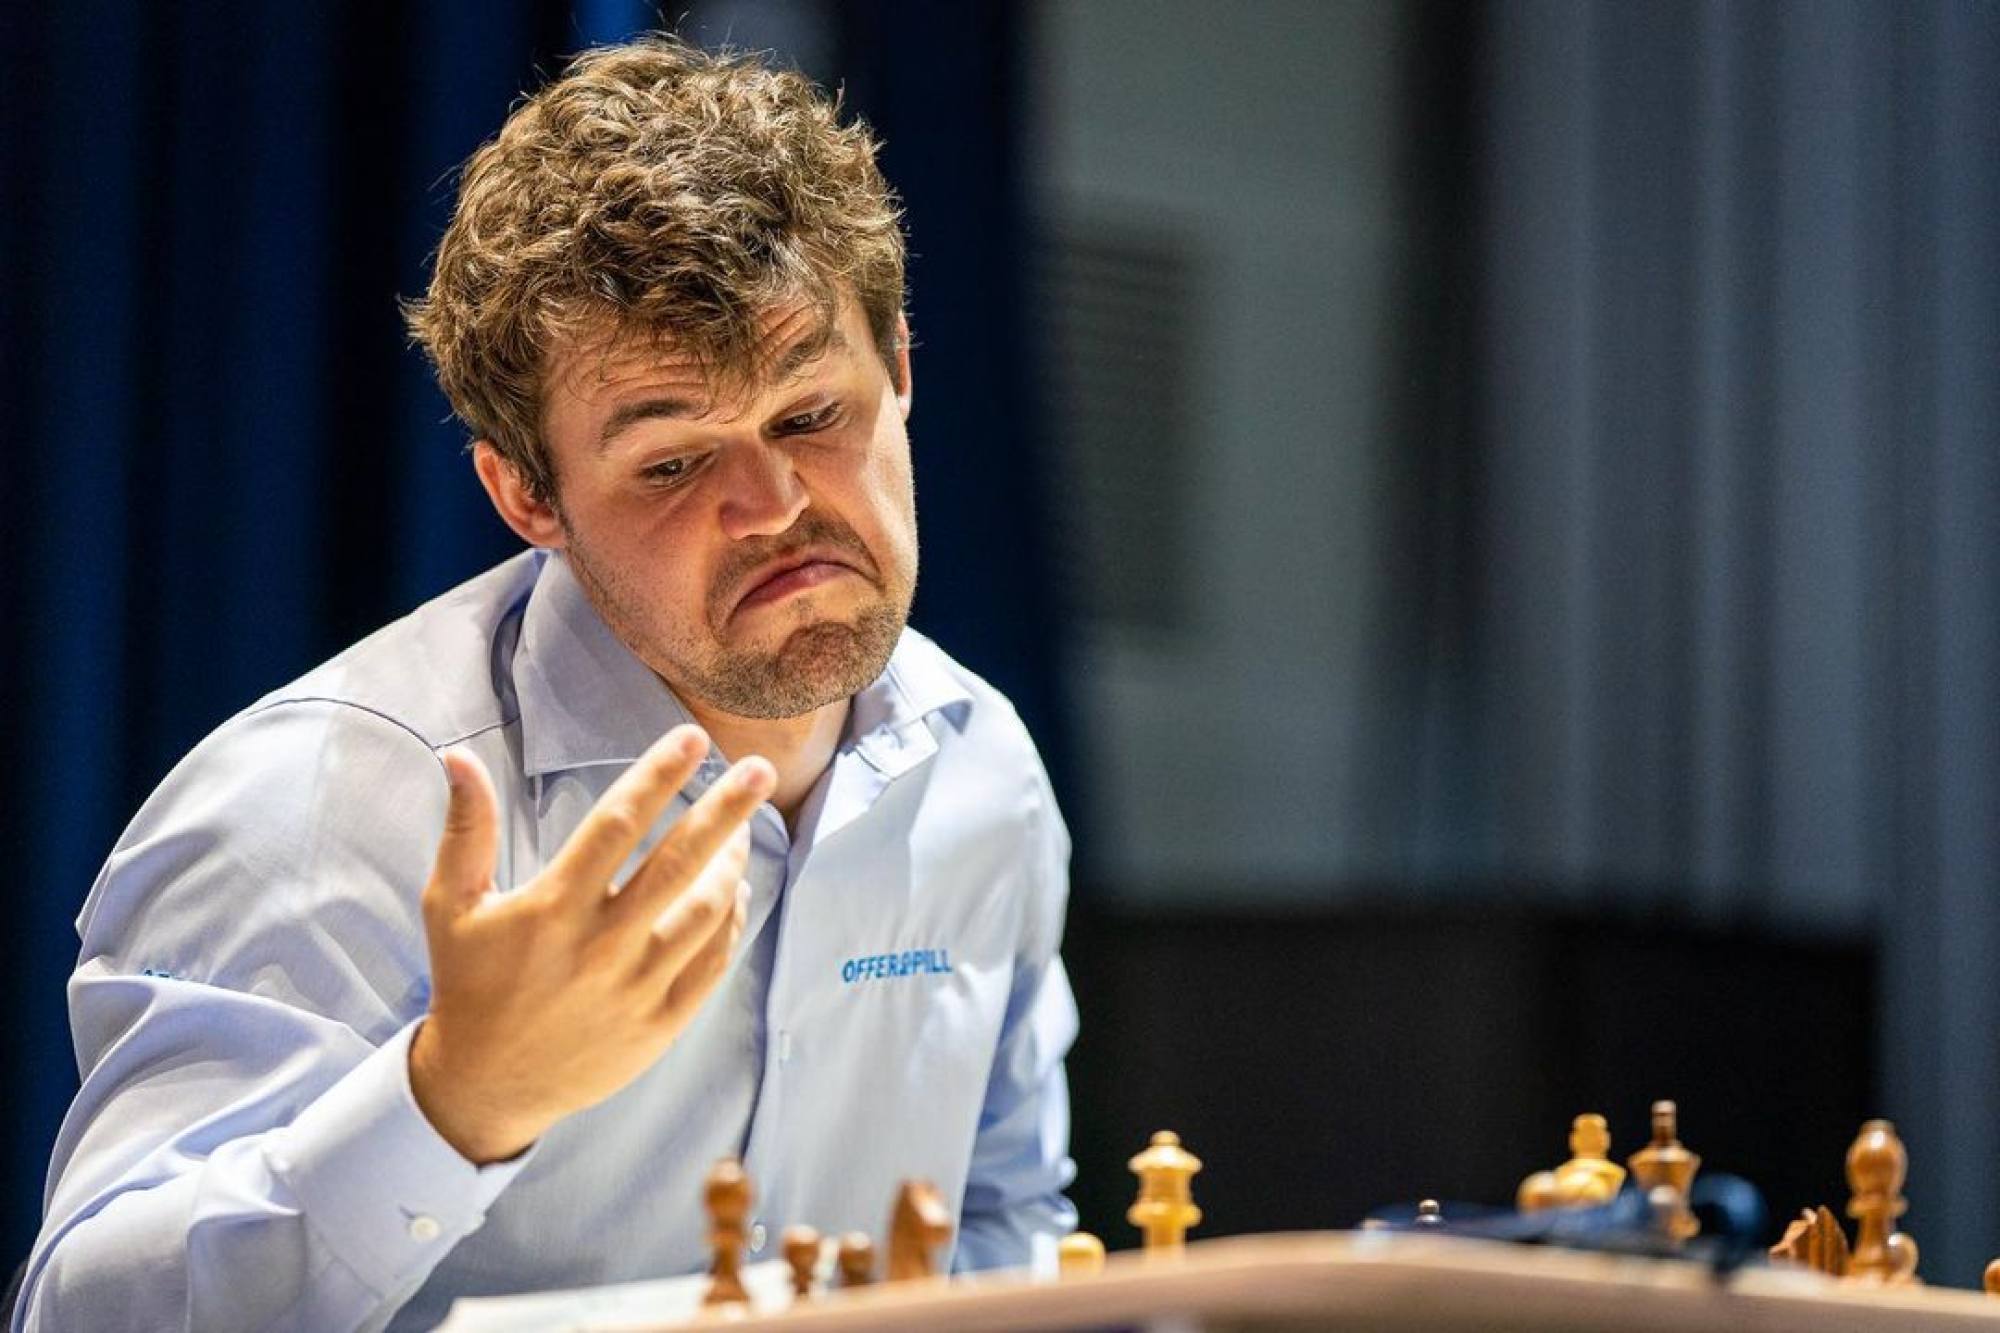 Is Magnus Carlsen the greatest chess player ever? Not according to  chess24's Hall of Fame